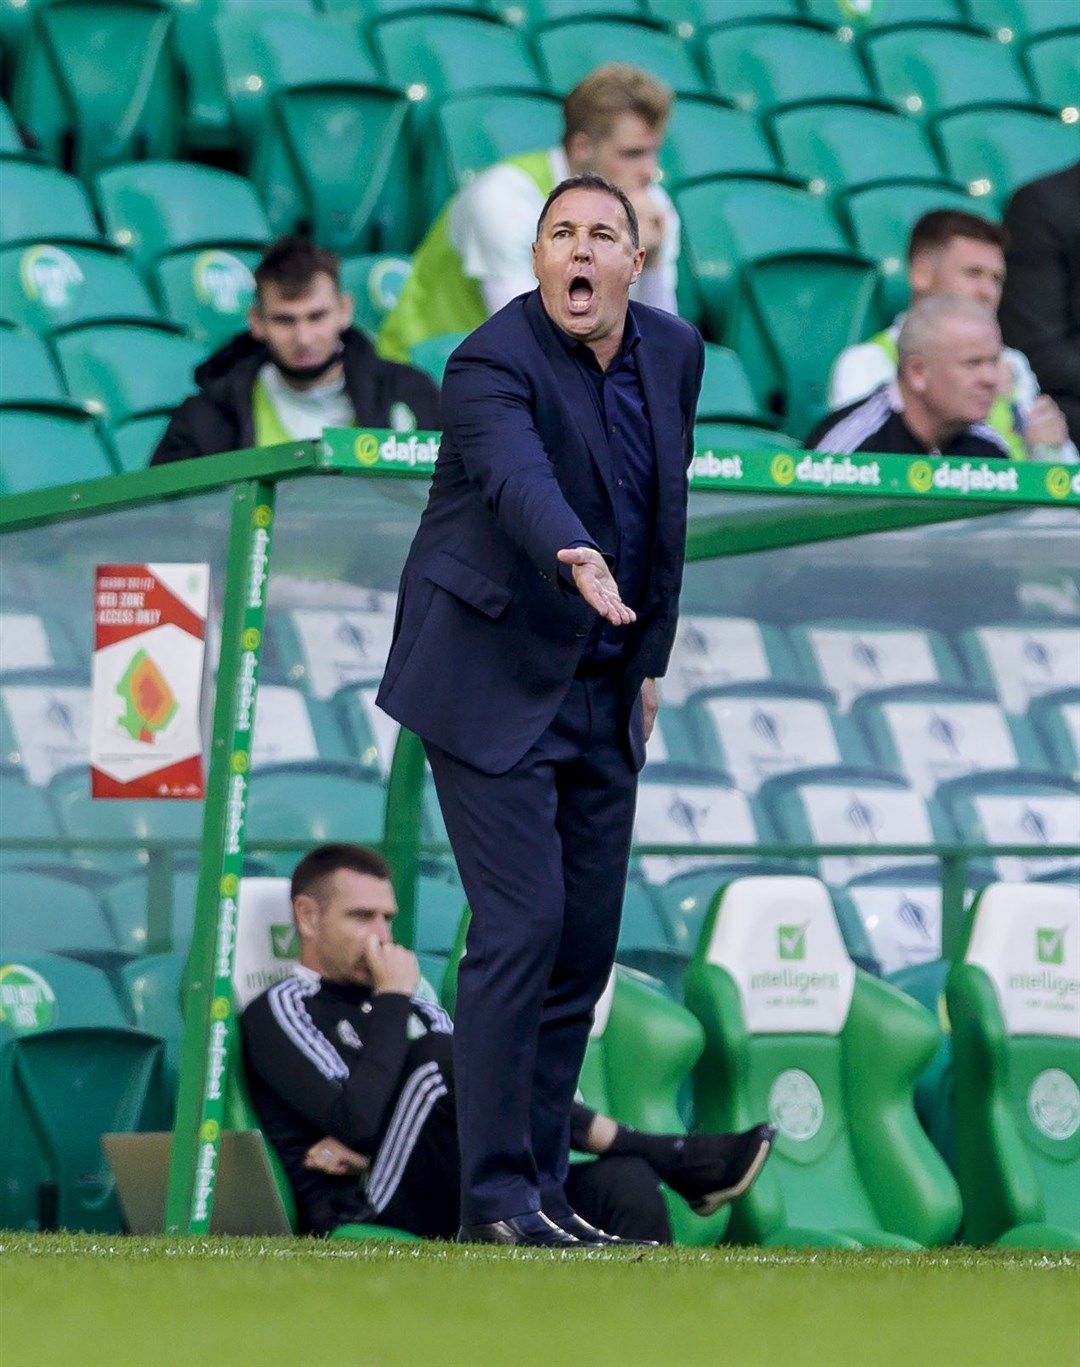 Picture - Ken Macpherson, Inverness. Celtic(3) v Ross County(0). 11.09.21. Ross County manager Malky Mackay.